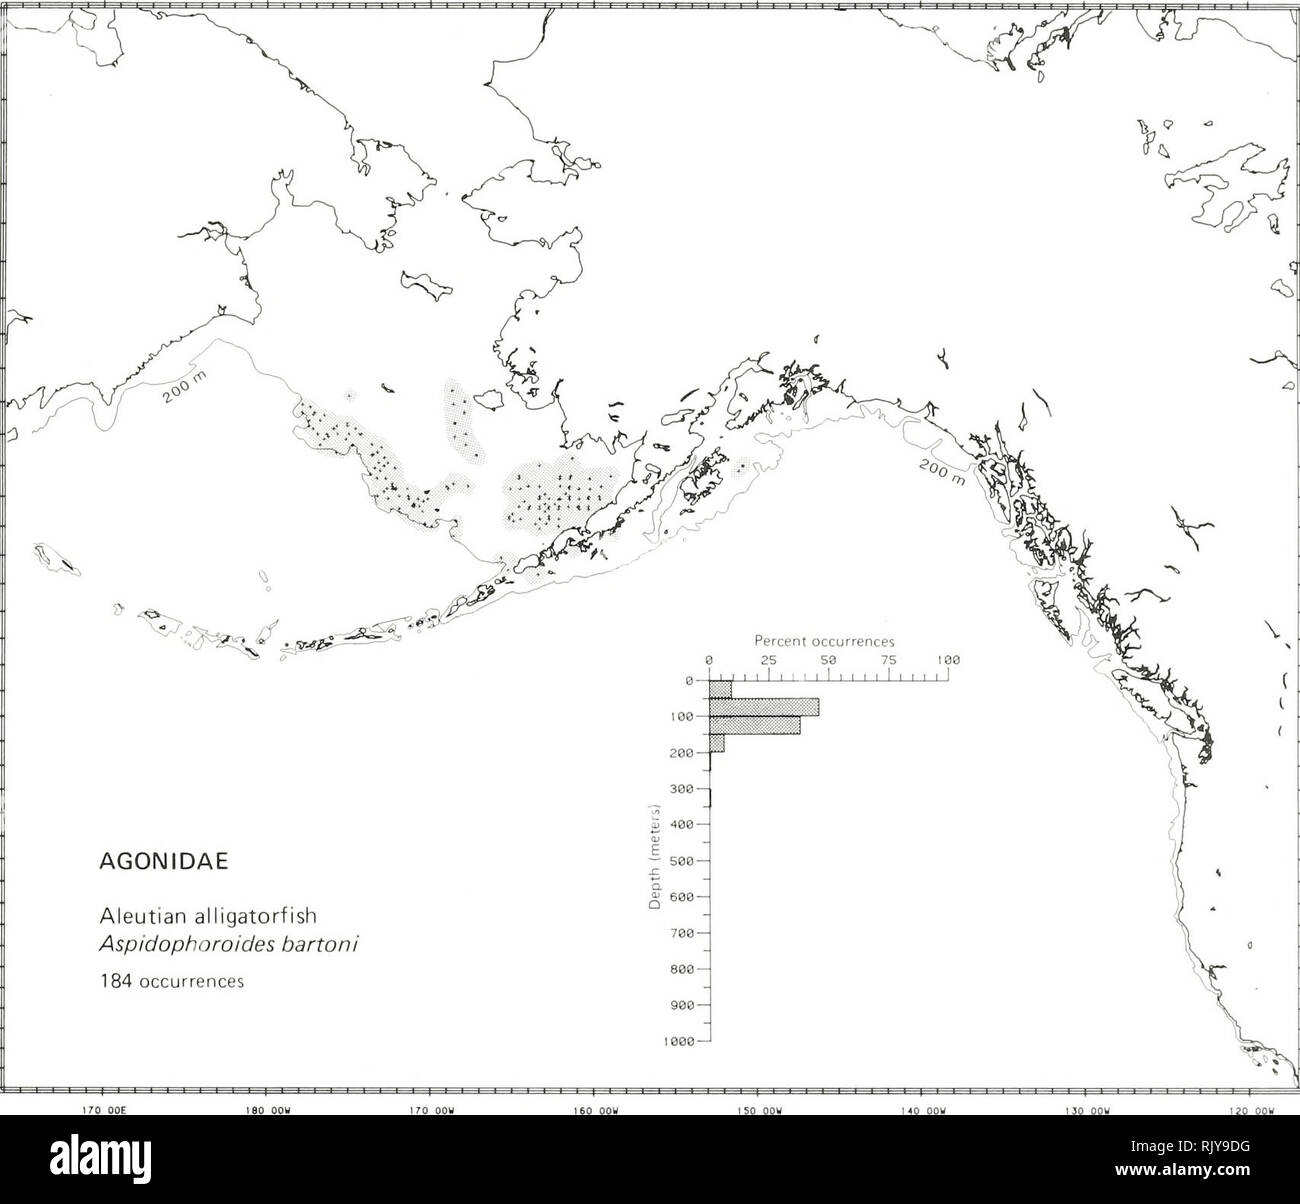 . Atlas and zoogeography of common fishes in the Bering Sea and Northeastern Pacific / M. James Allen, Gary B. Smith. Fishes Bering Sea Geographical distribution.. ALEUTIAN ALLIGATORFISH, Aspidophoroides bartoni Gilbert 1896 Agonidae: Poachers Literature Reported from the northern Sea of Japan and Sea of Okhotsk to the Arctic, south to the Gulf of Alaska, and west along the Aleutian Islands to Amchitka Island (Wilimovsky 1964; Quast and Hall 1972; Howe 1981), at depths of 22 to 223 m (Howe 1981). Survey data Found from Pervenets Canyon and Nunivak Island in the eastern Bering Sea, southeast to Stock Photo